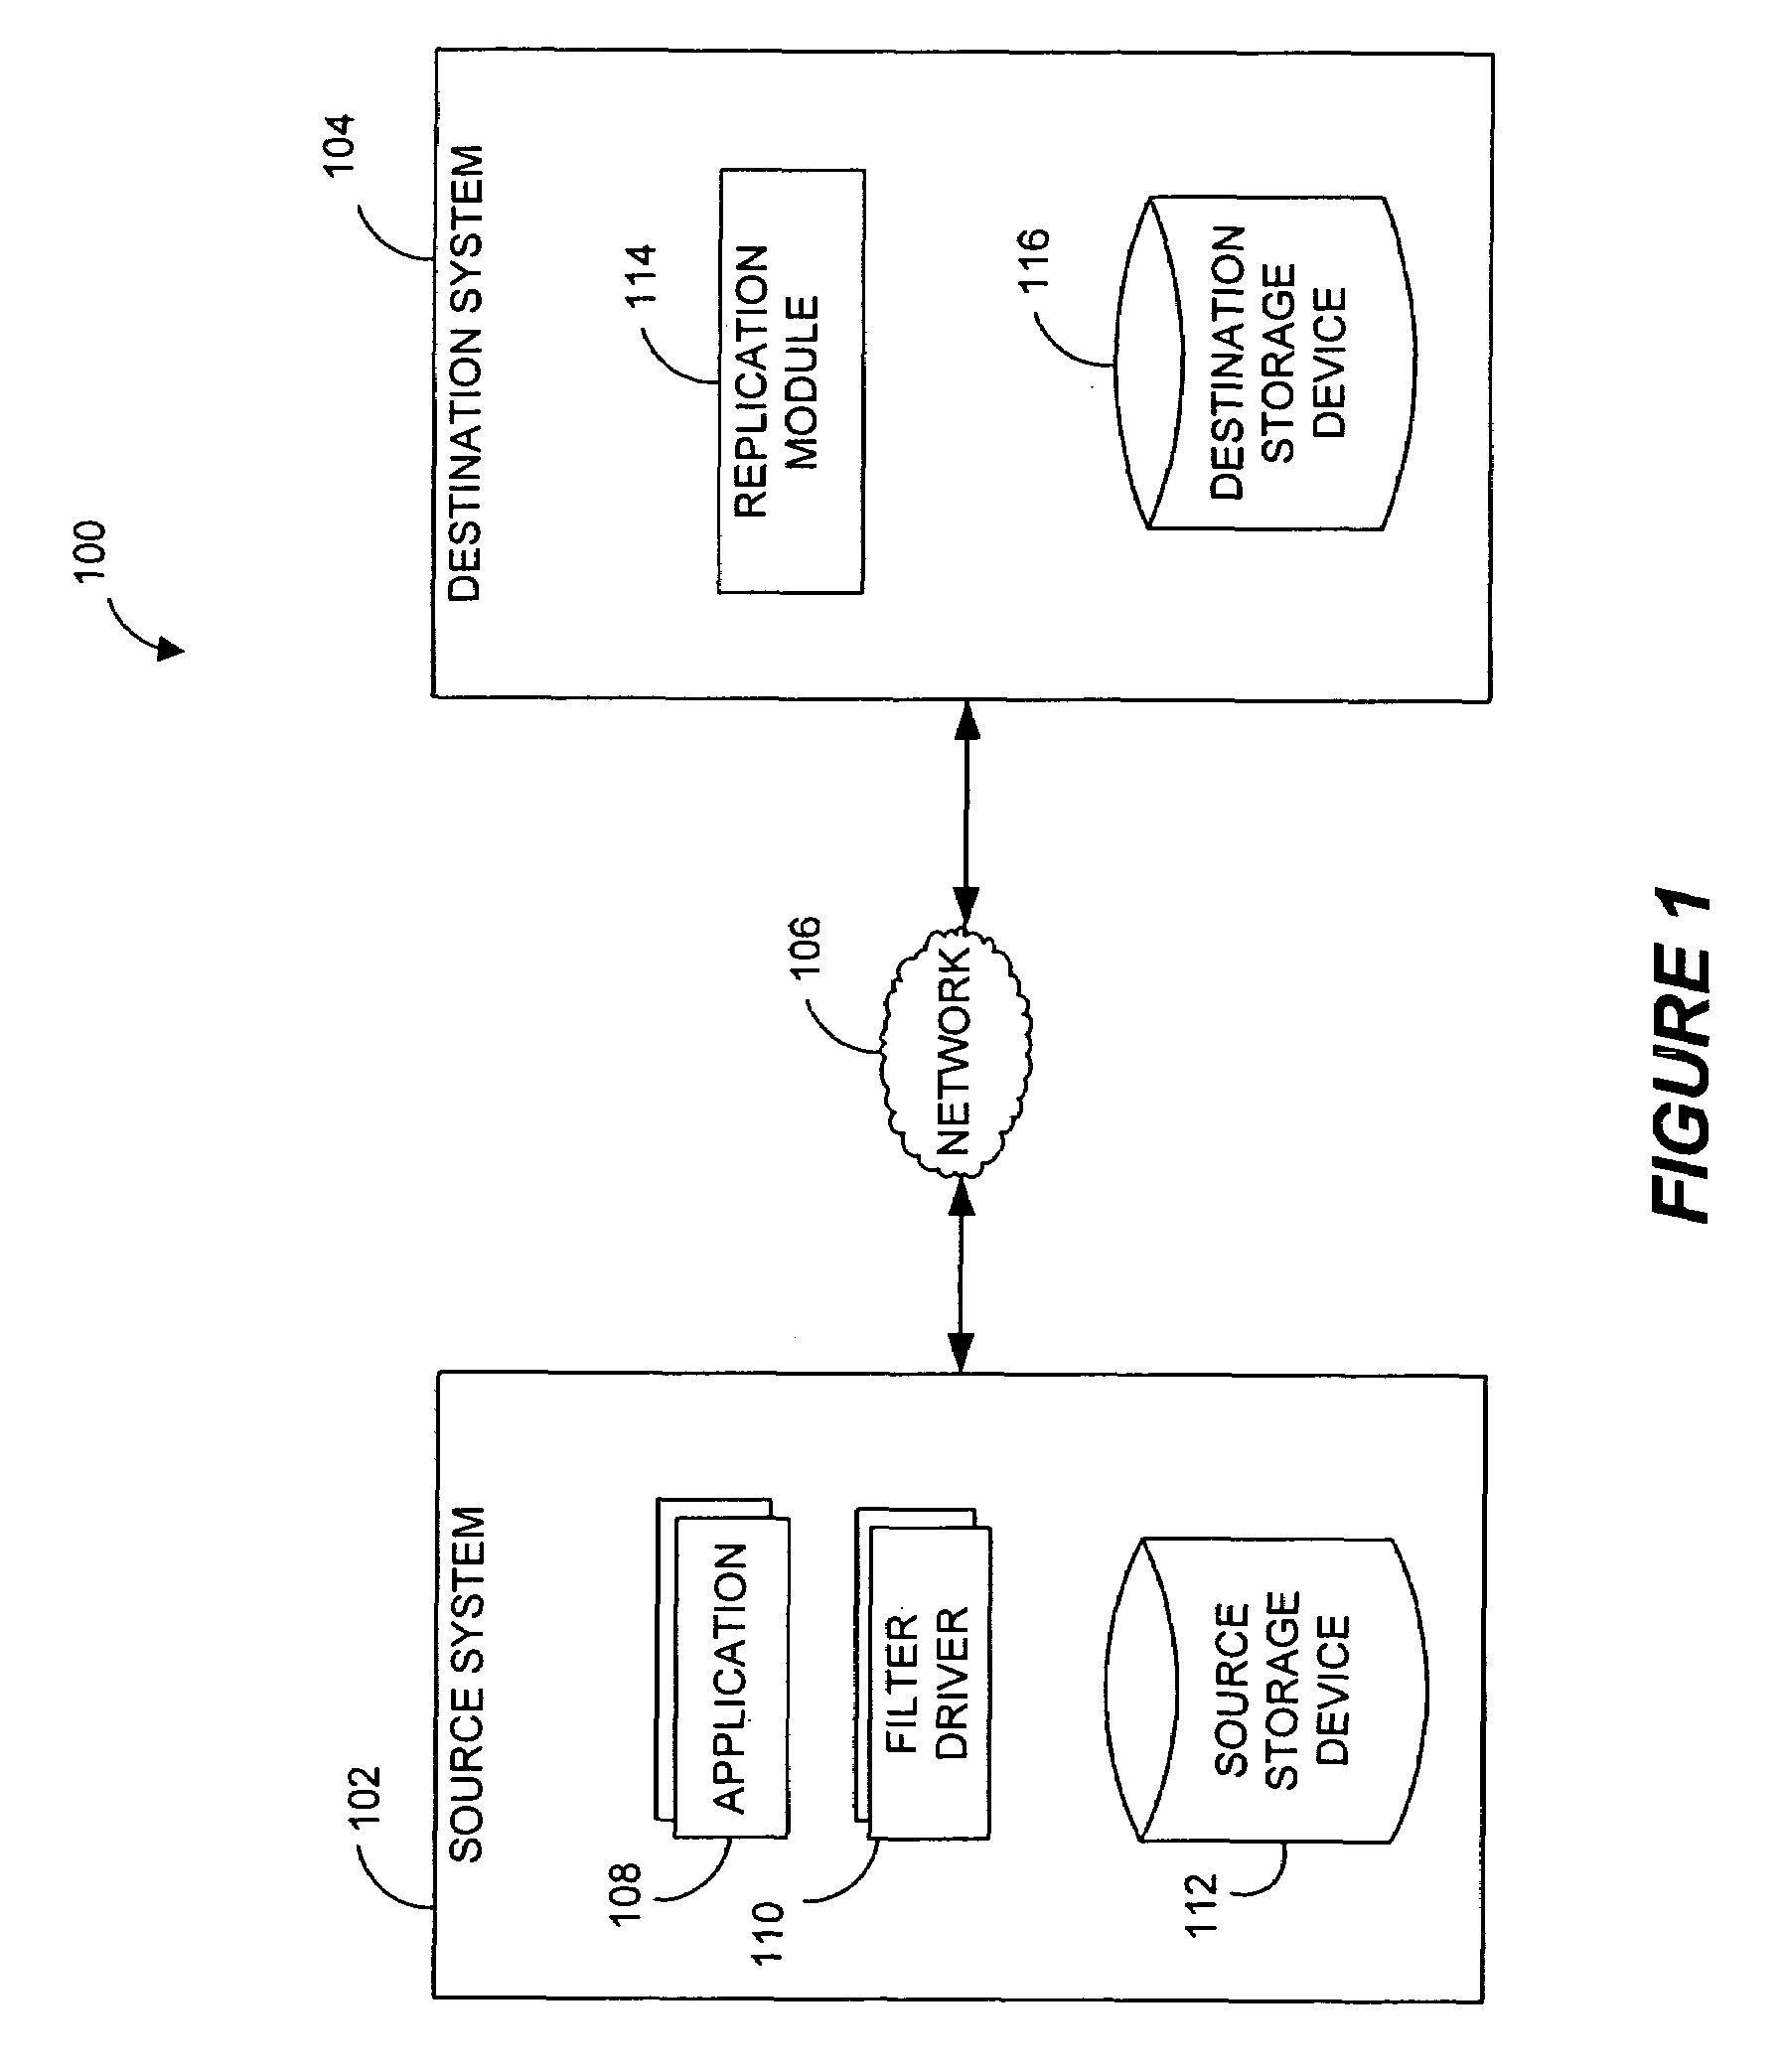 Destination systems and methods for performing data replication